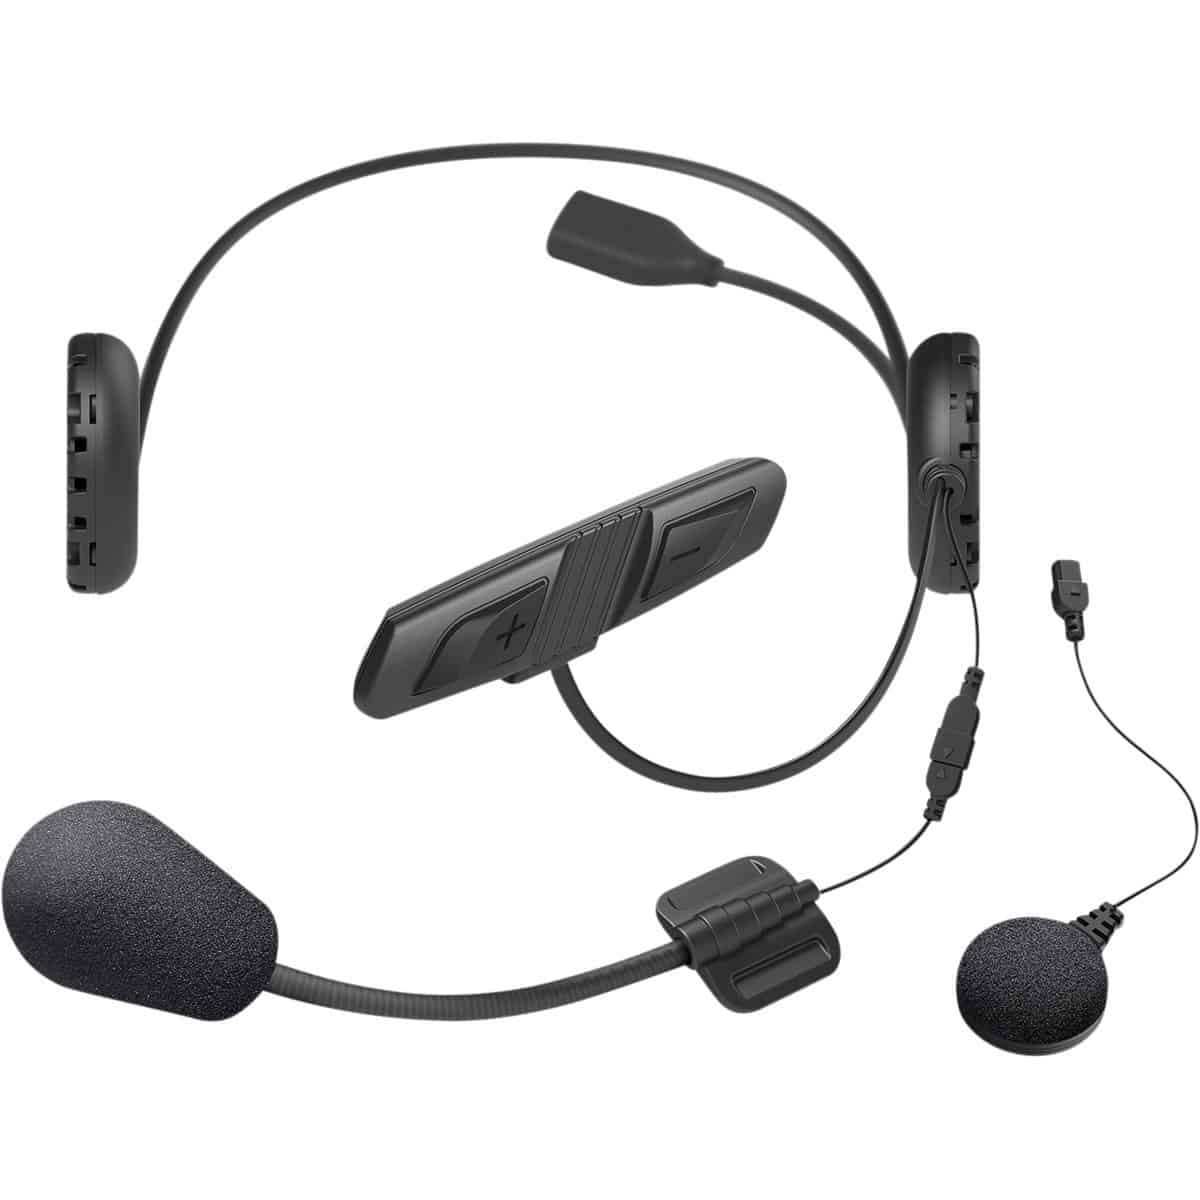 Introducing the Sena 3S Plus WB Universal Microphone Kit! It's a special headset that helps you talk to your friends while you're on the road. 